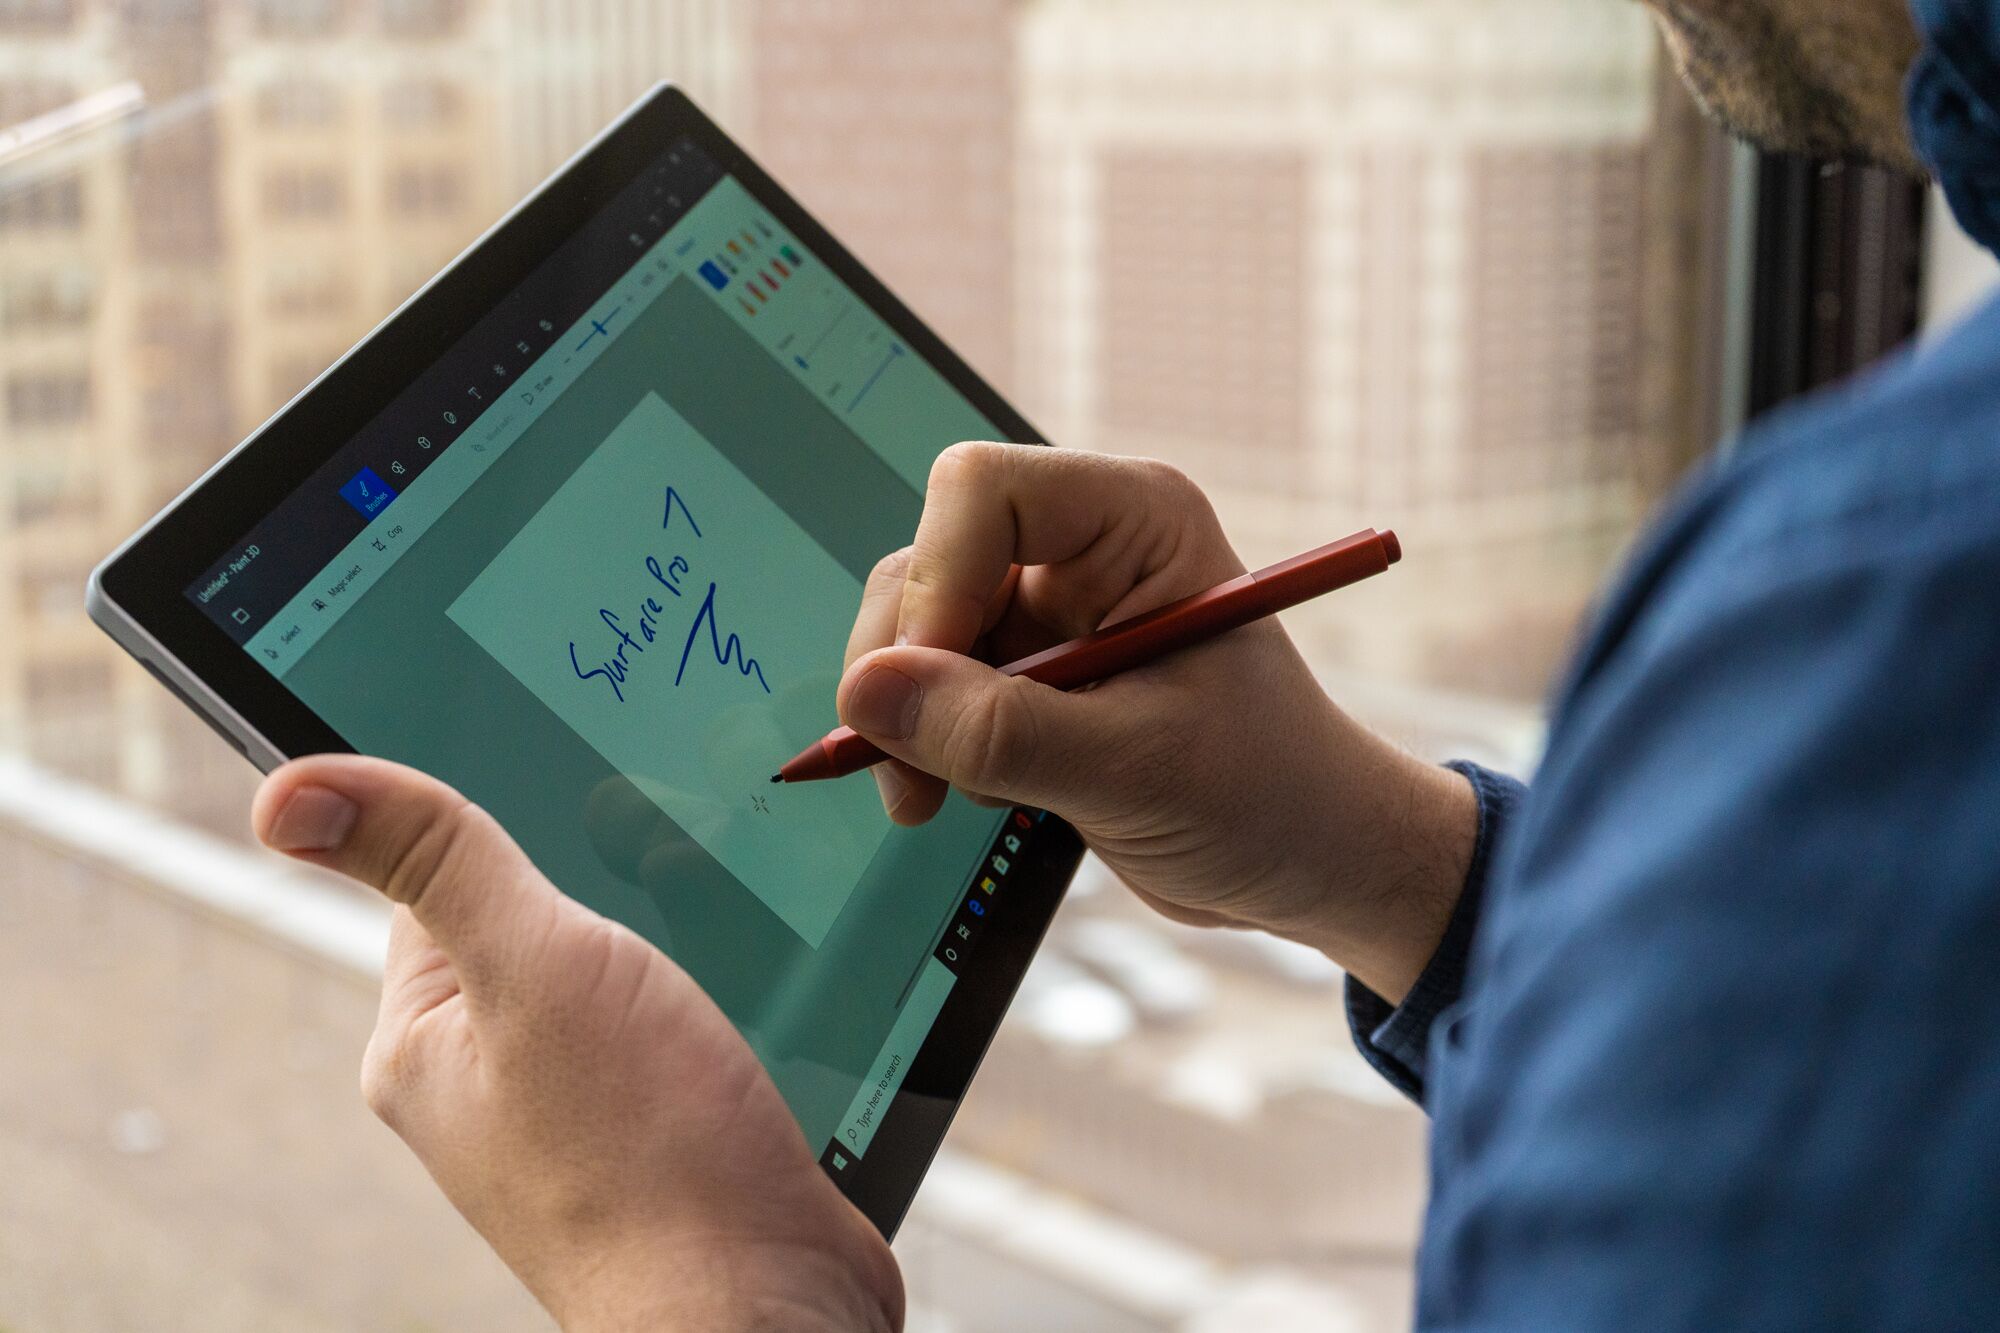 Microsoft Surface Pro 7 Hands-on Review: Price, Specs, & Features